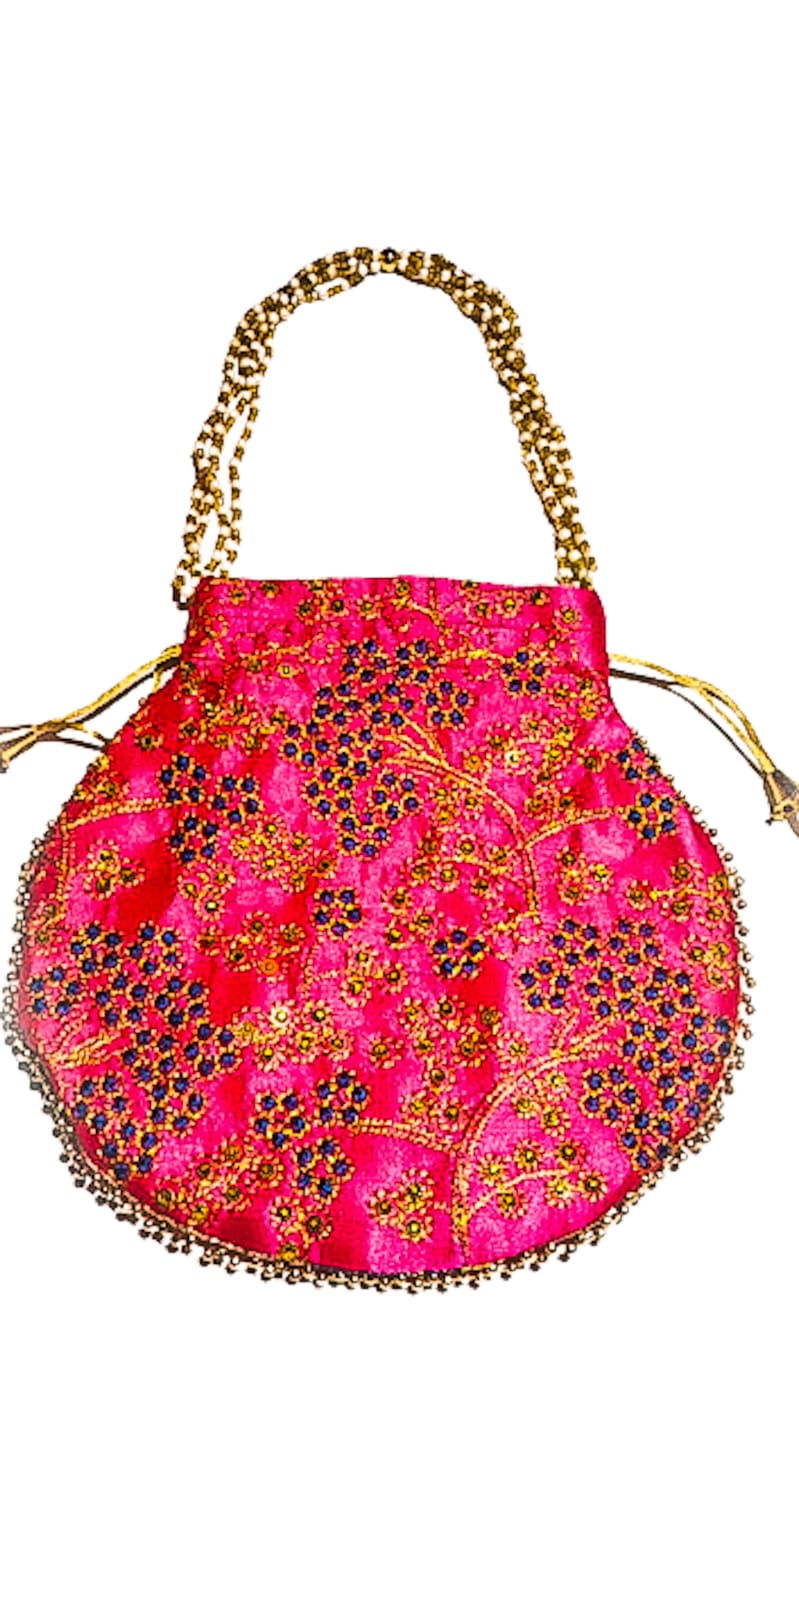 Potli bag silk Handmade peacock design women Zari Embroidered in Magenta colour Hand Clutch gifts for bride wedding Ethnic Pouch Bead pearl